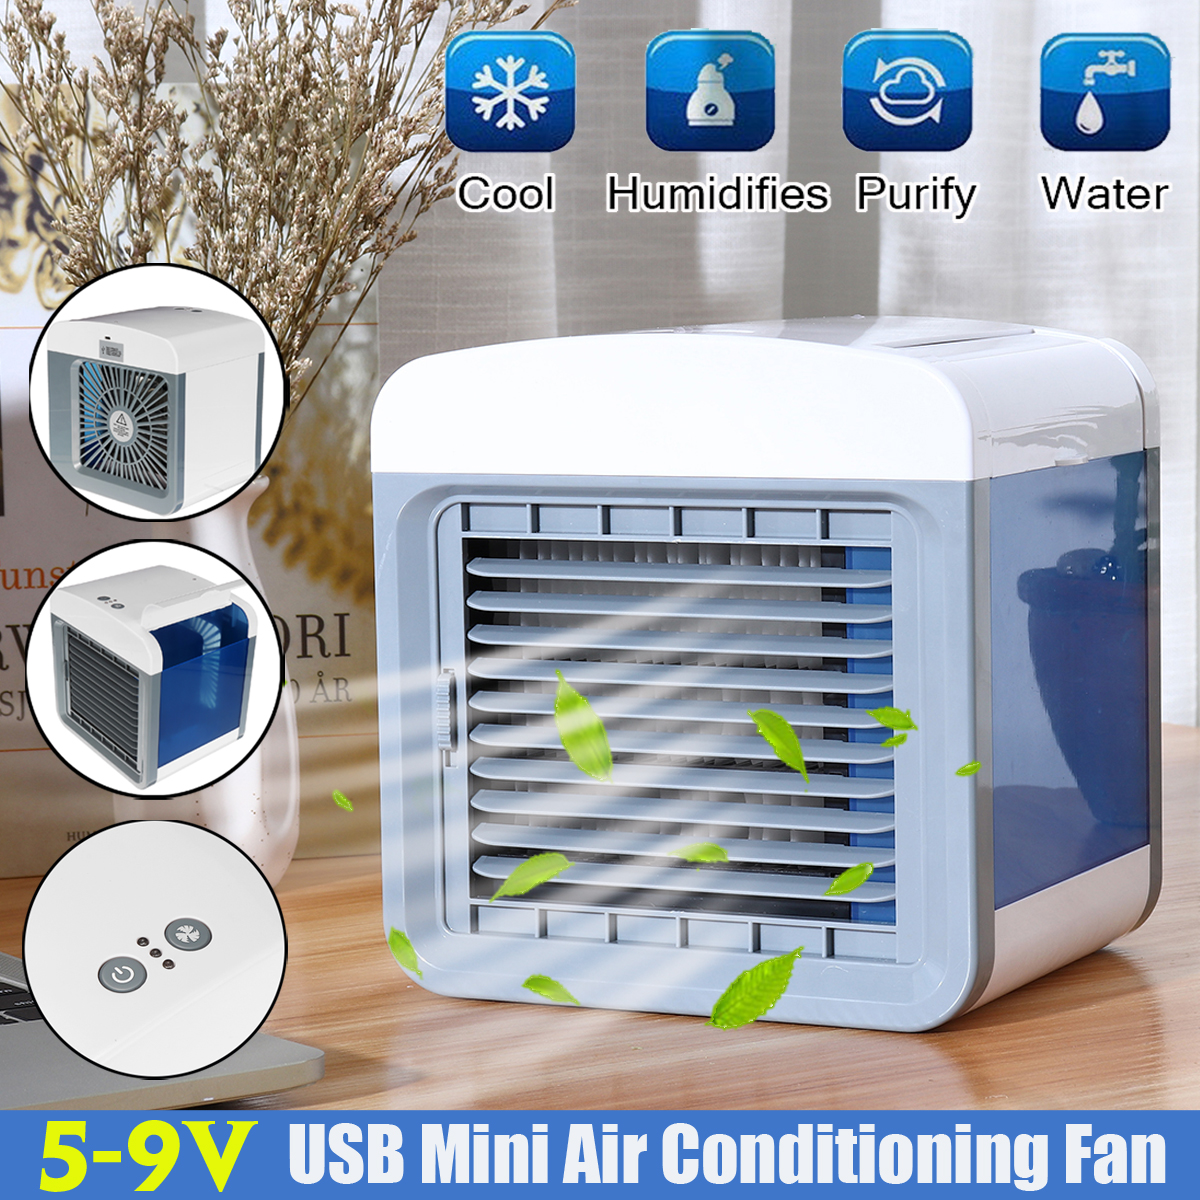 

5-9V USB Mini Air Conditioning Fan Humidifier Home Cleaner